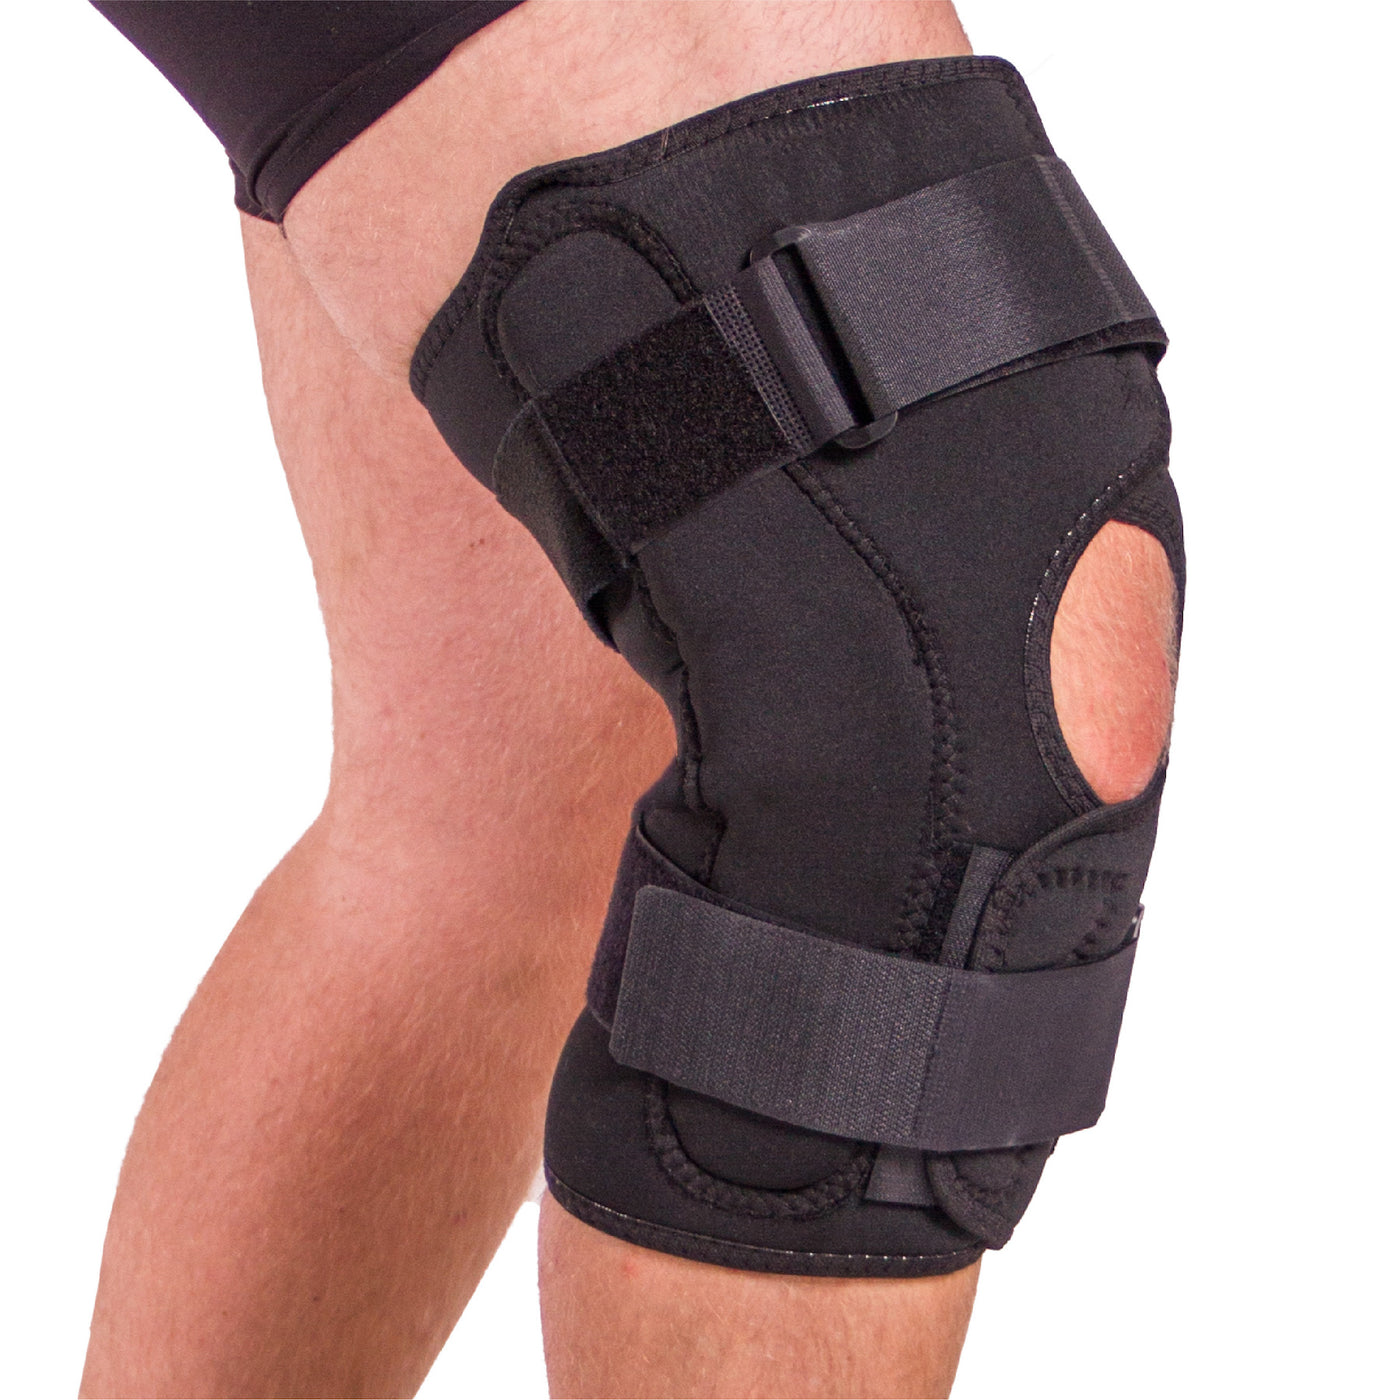 Obesity knee pain brace for plus size people and arthritis treatment